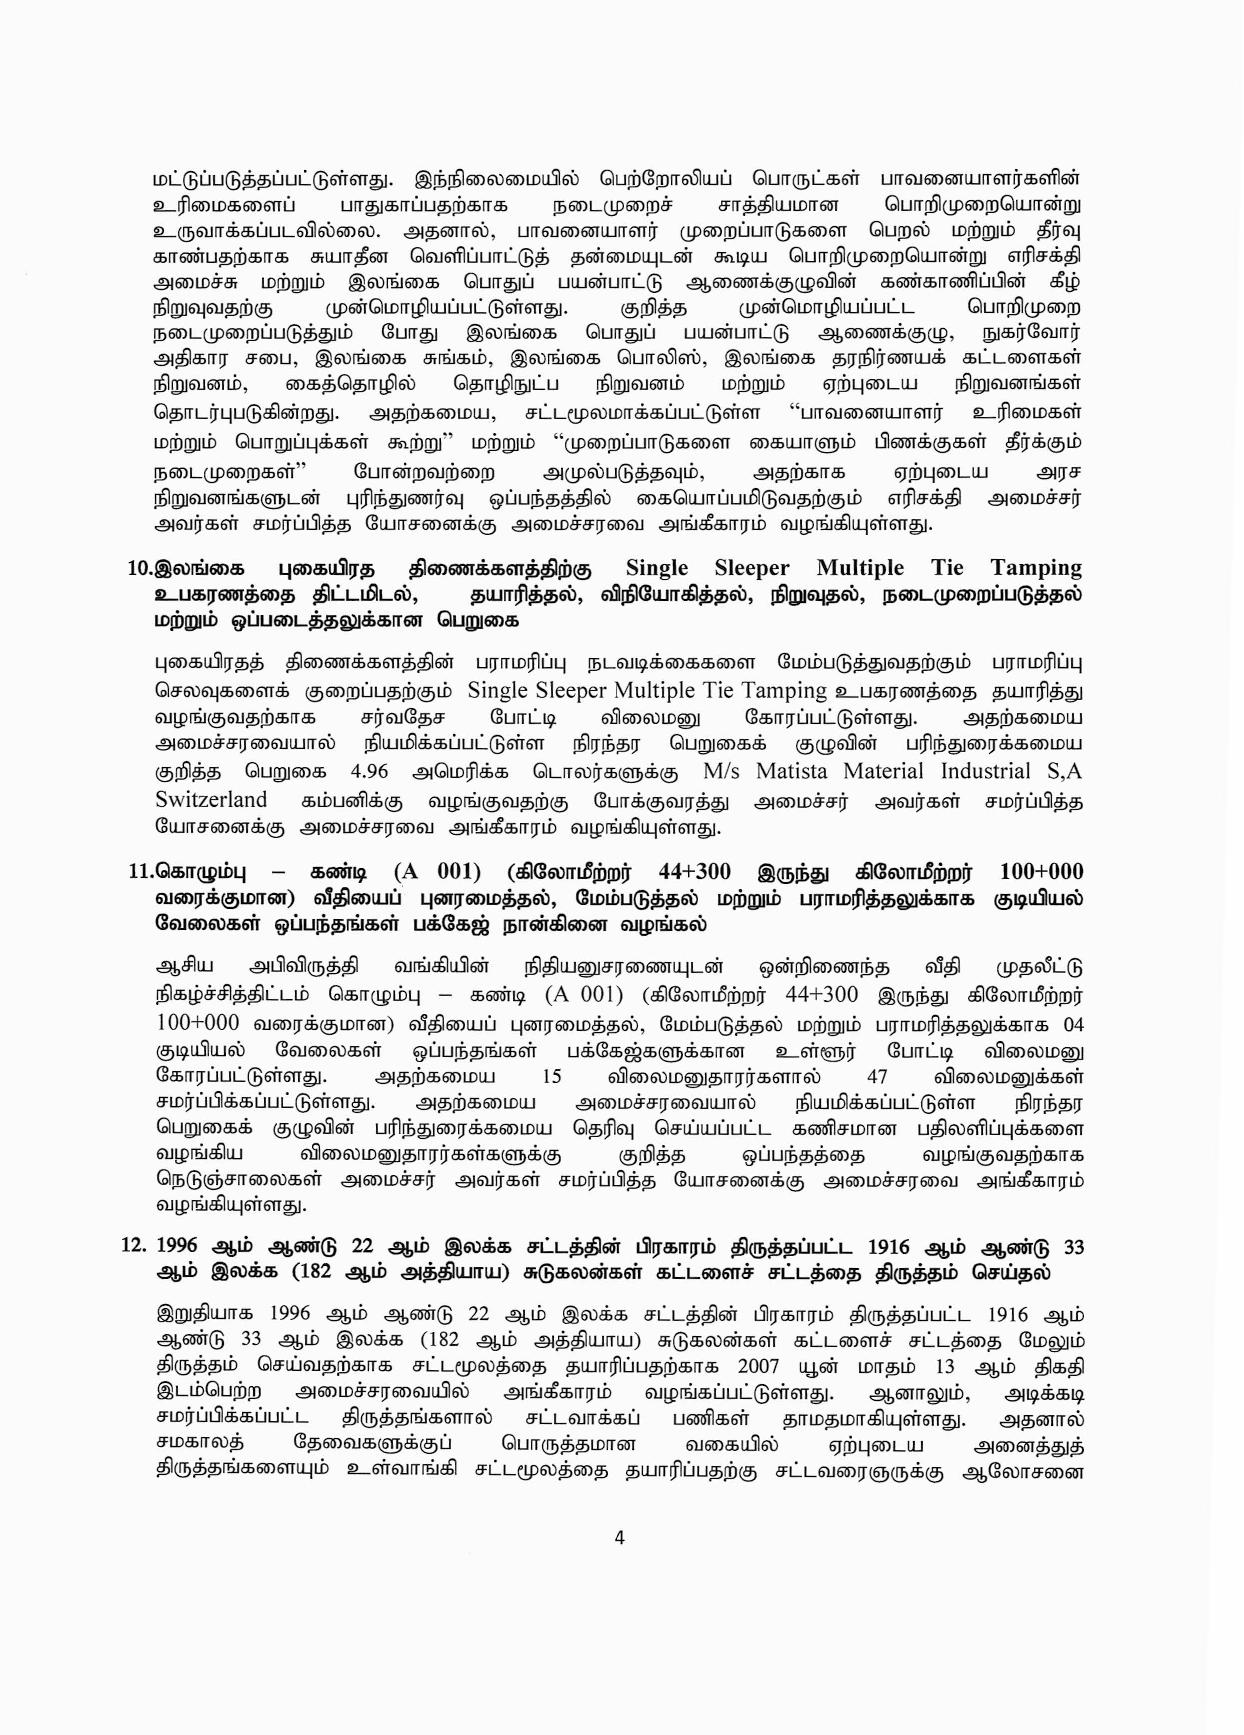 Cabinet Decision on 29.03.2021 Tamil page 004